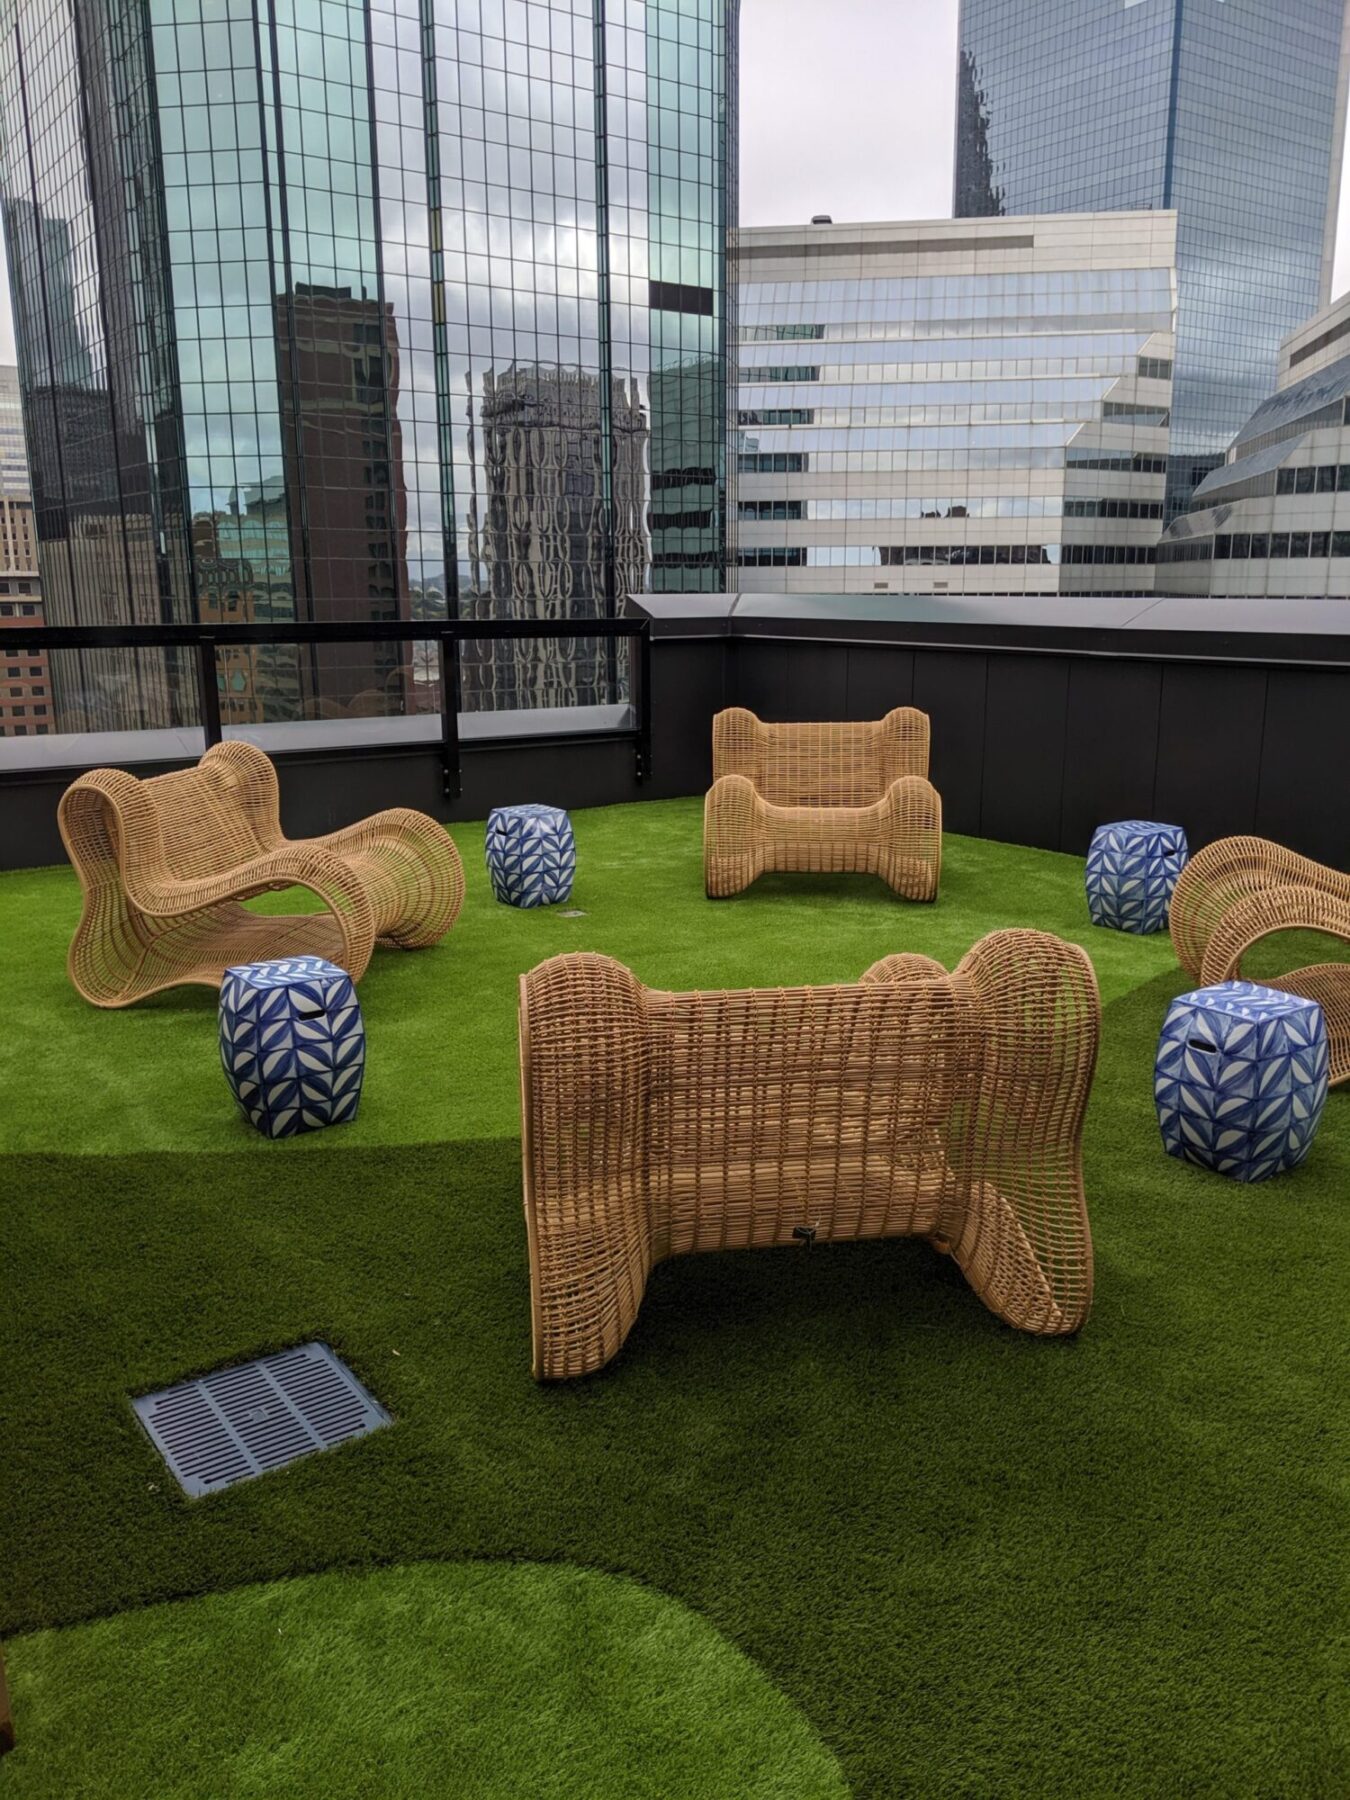 new york rooftop artificial lawn install